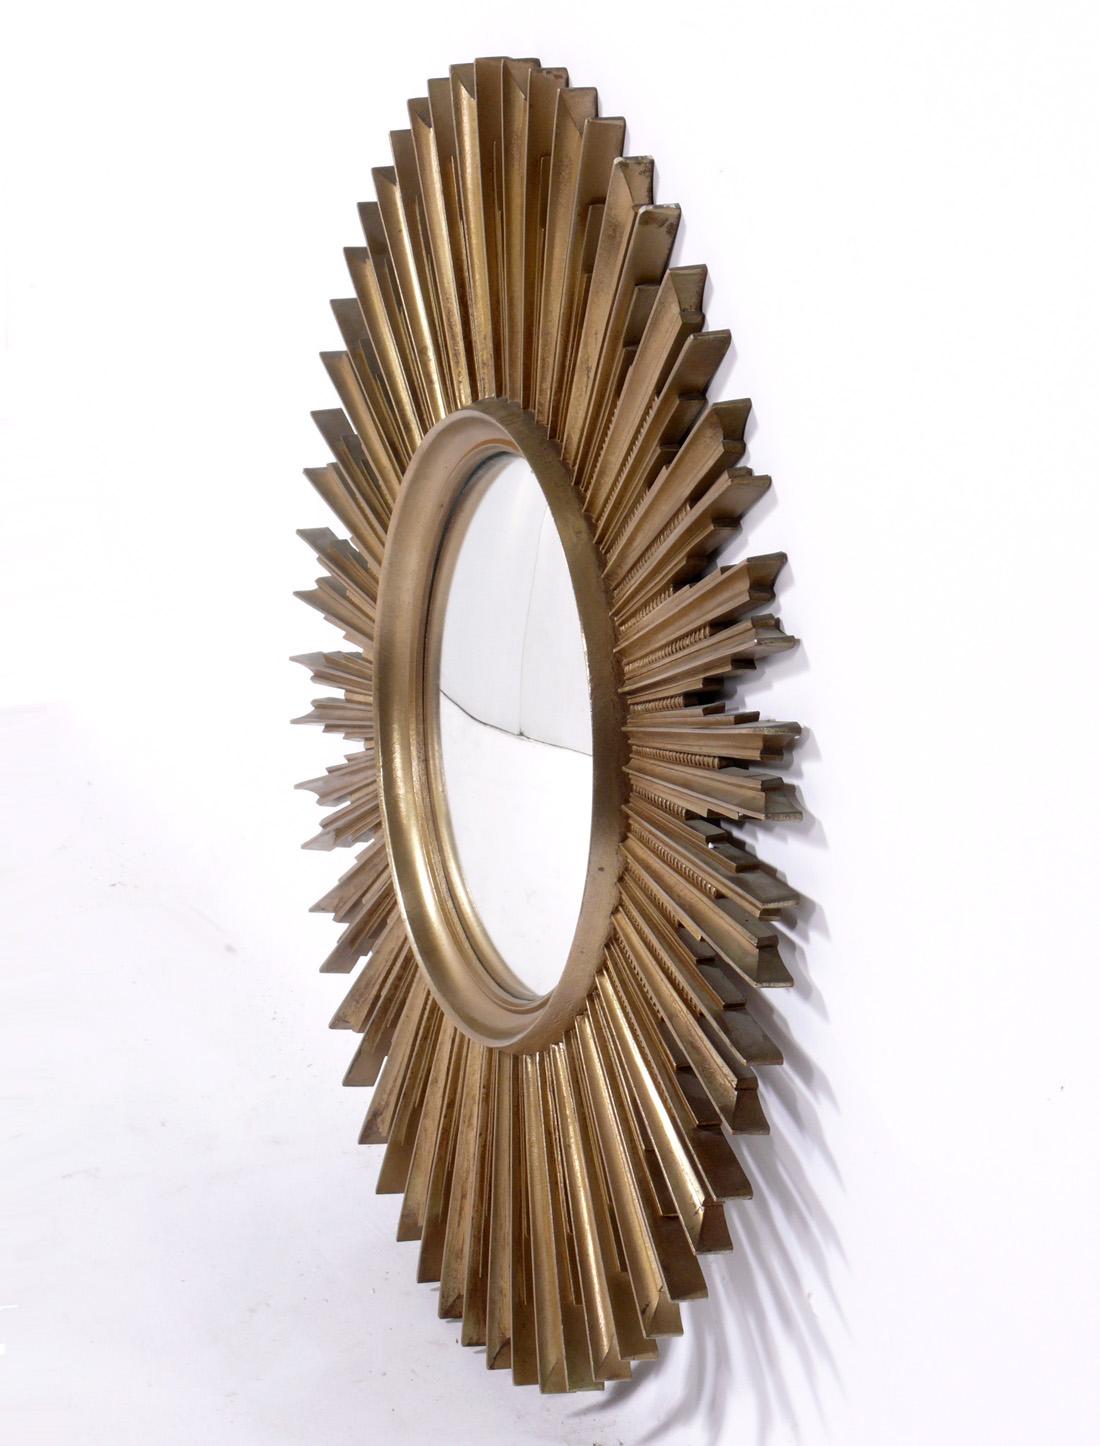 Starburst convex mirror, by Syroco, American, circa 1950s. Executed in 